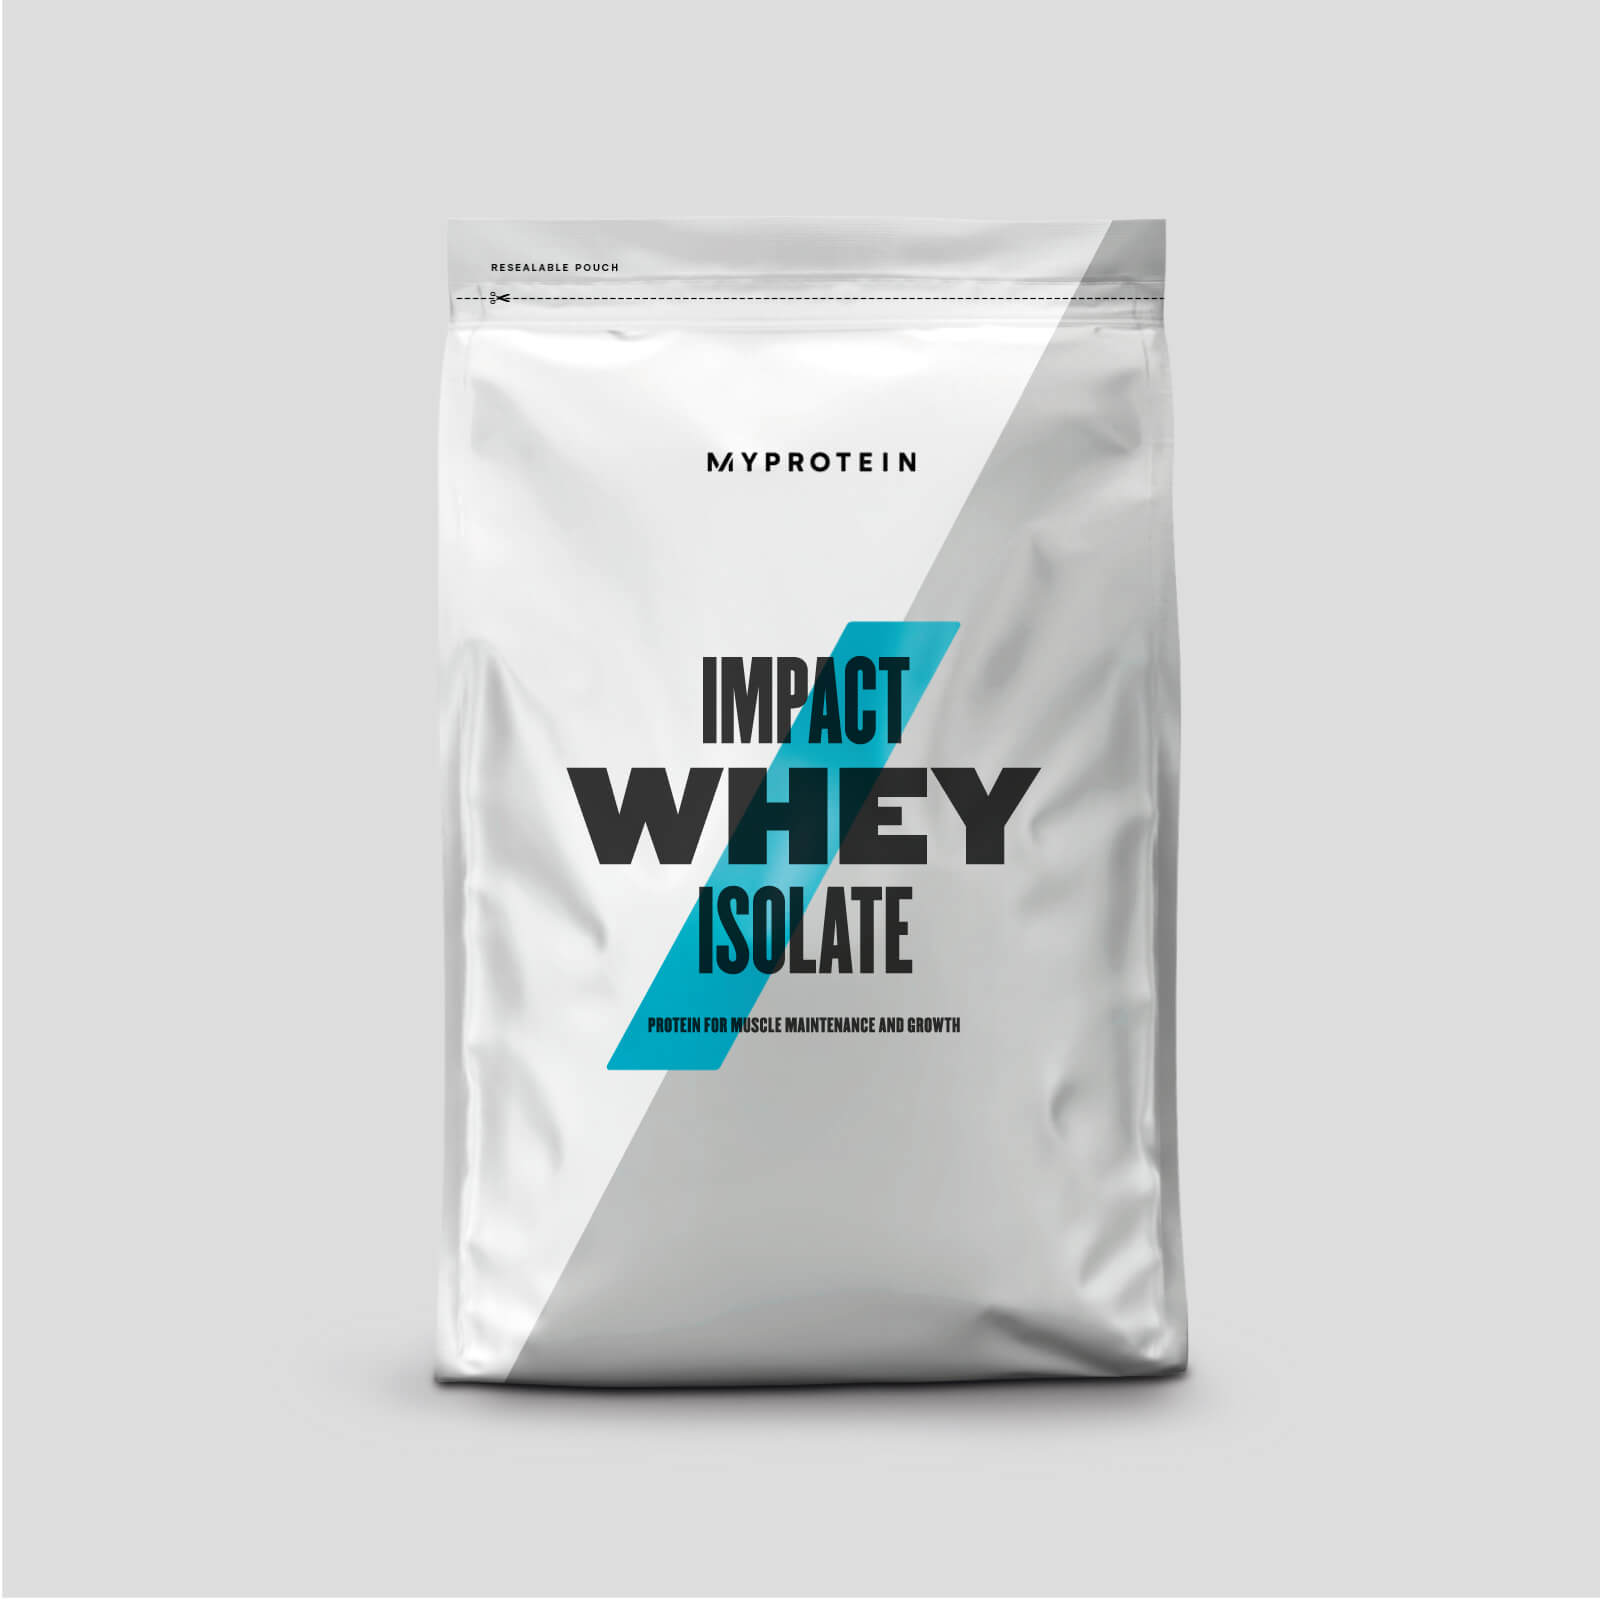 Myprotein Impact Whey Isolate - 2.5kg - Chocolate Peanut Butter